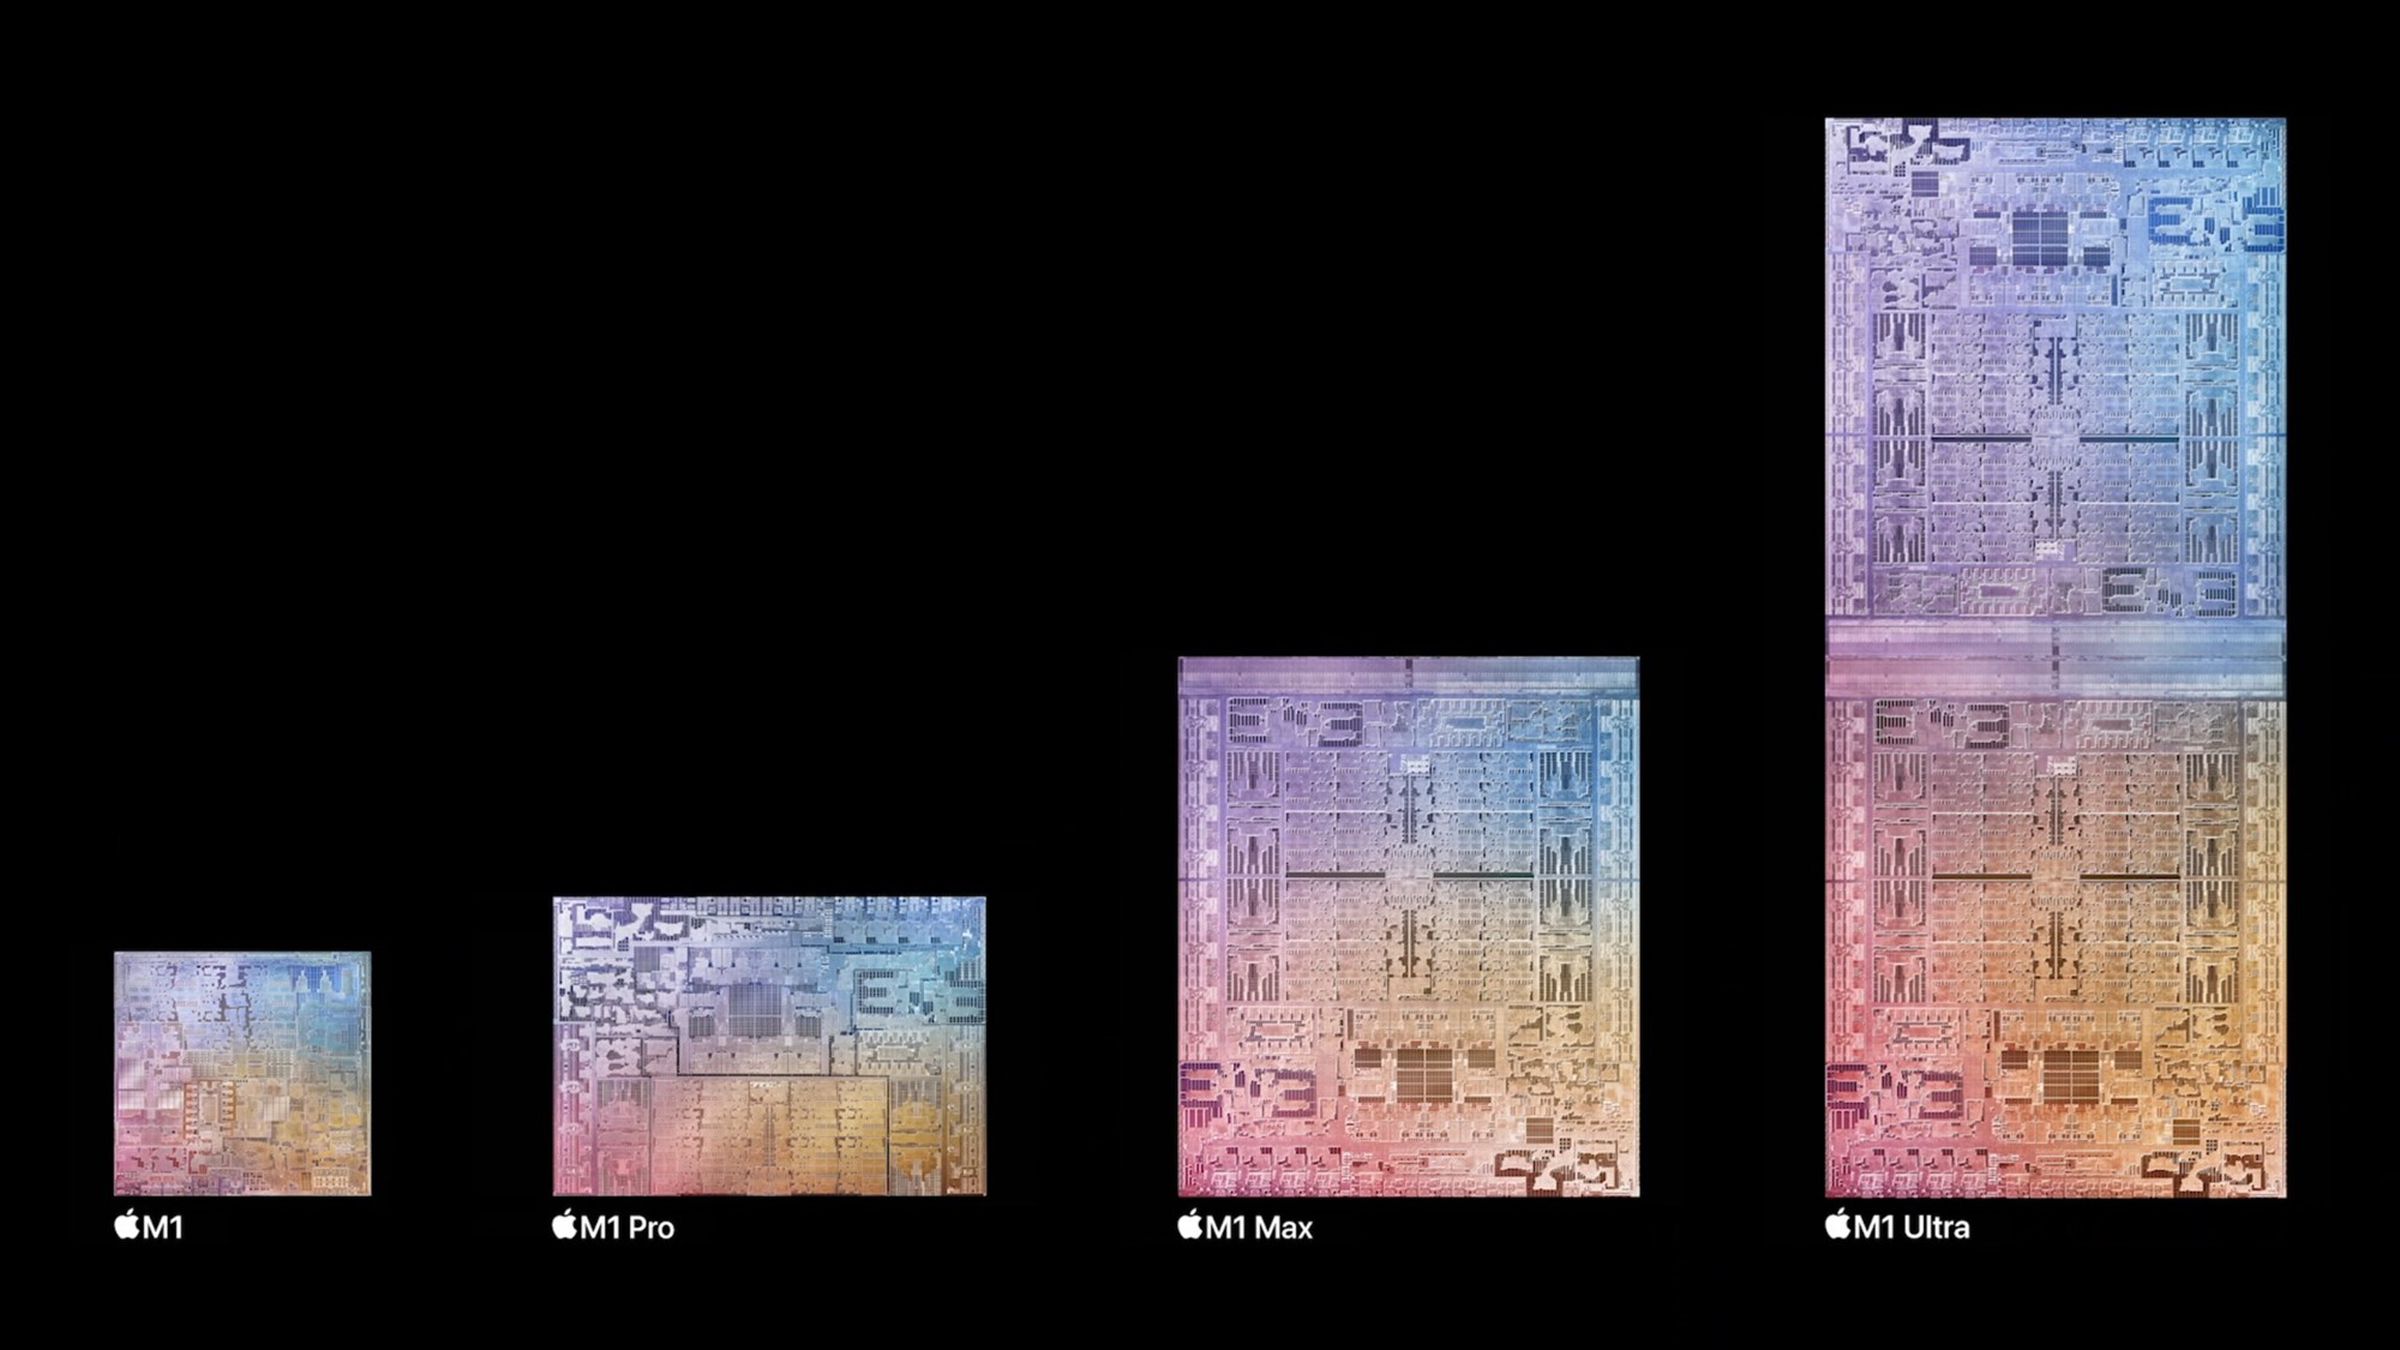 Apple now has four chips in its M1 lineup.